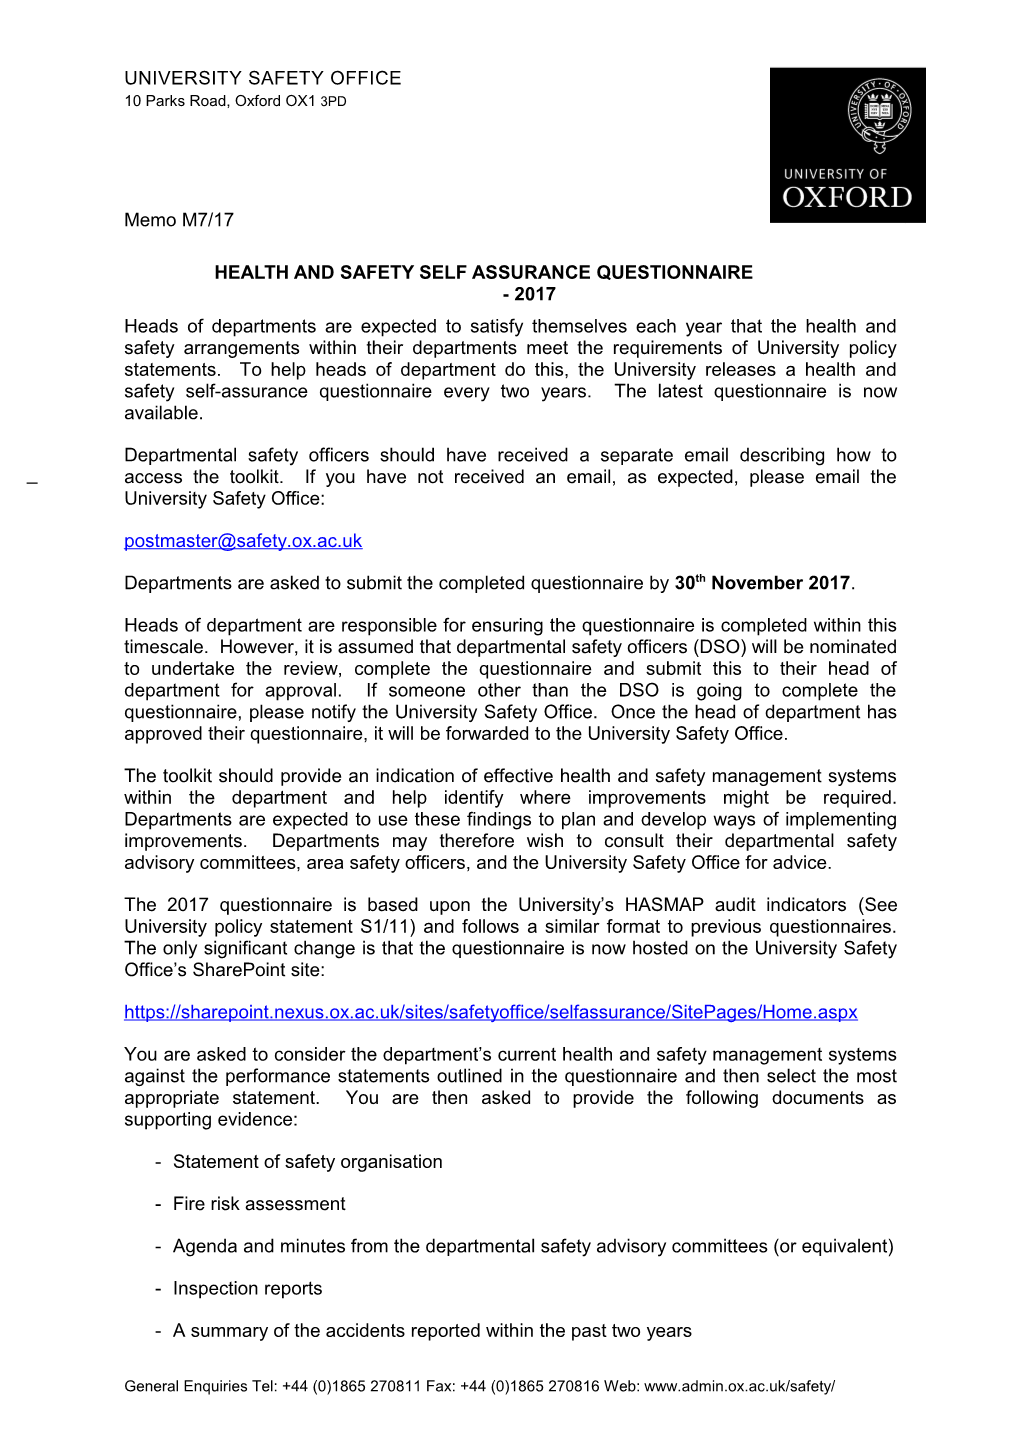 Health and Safety Self Assurance Questionnaire - 2017